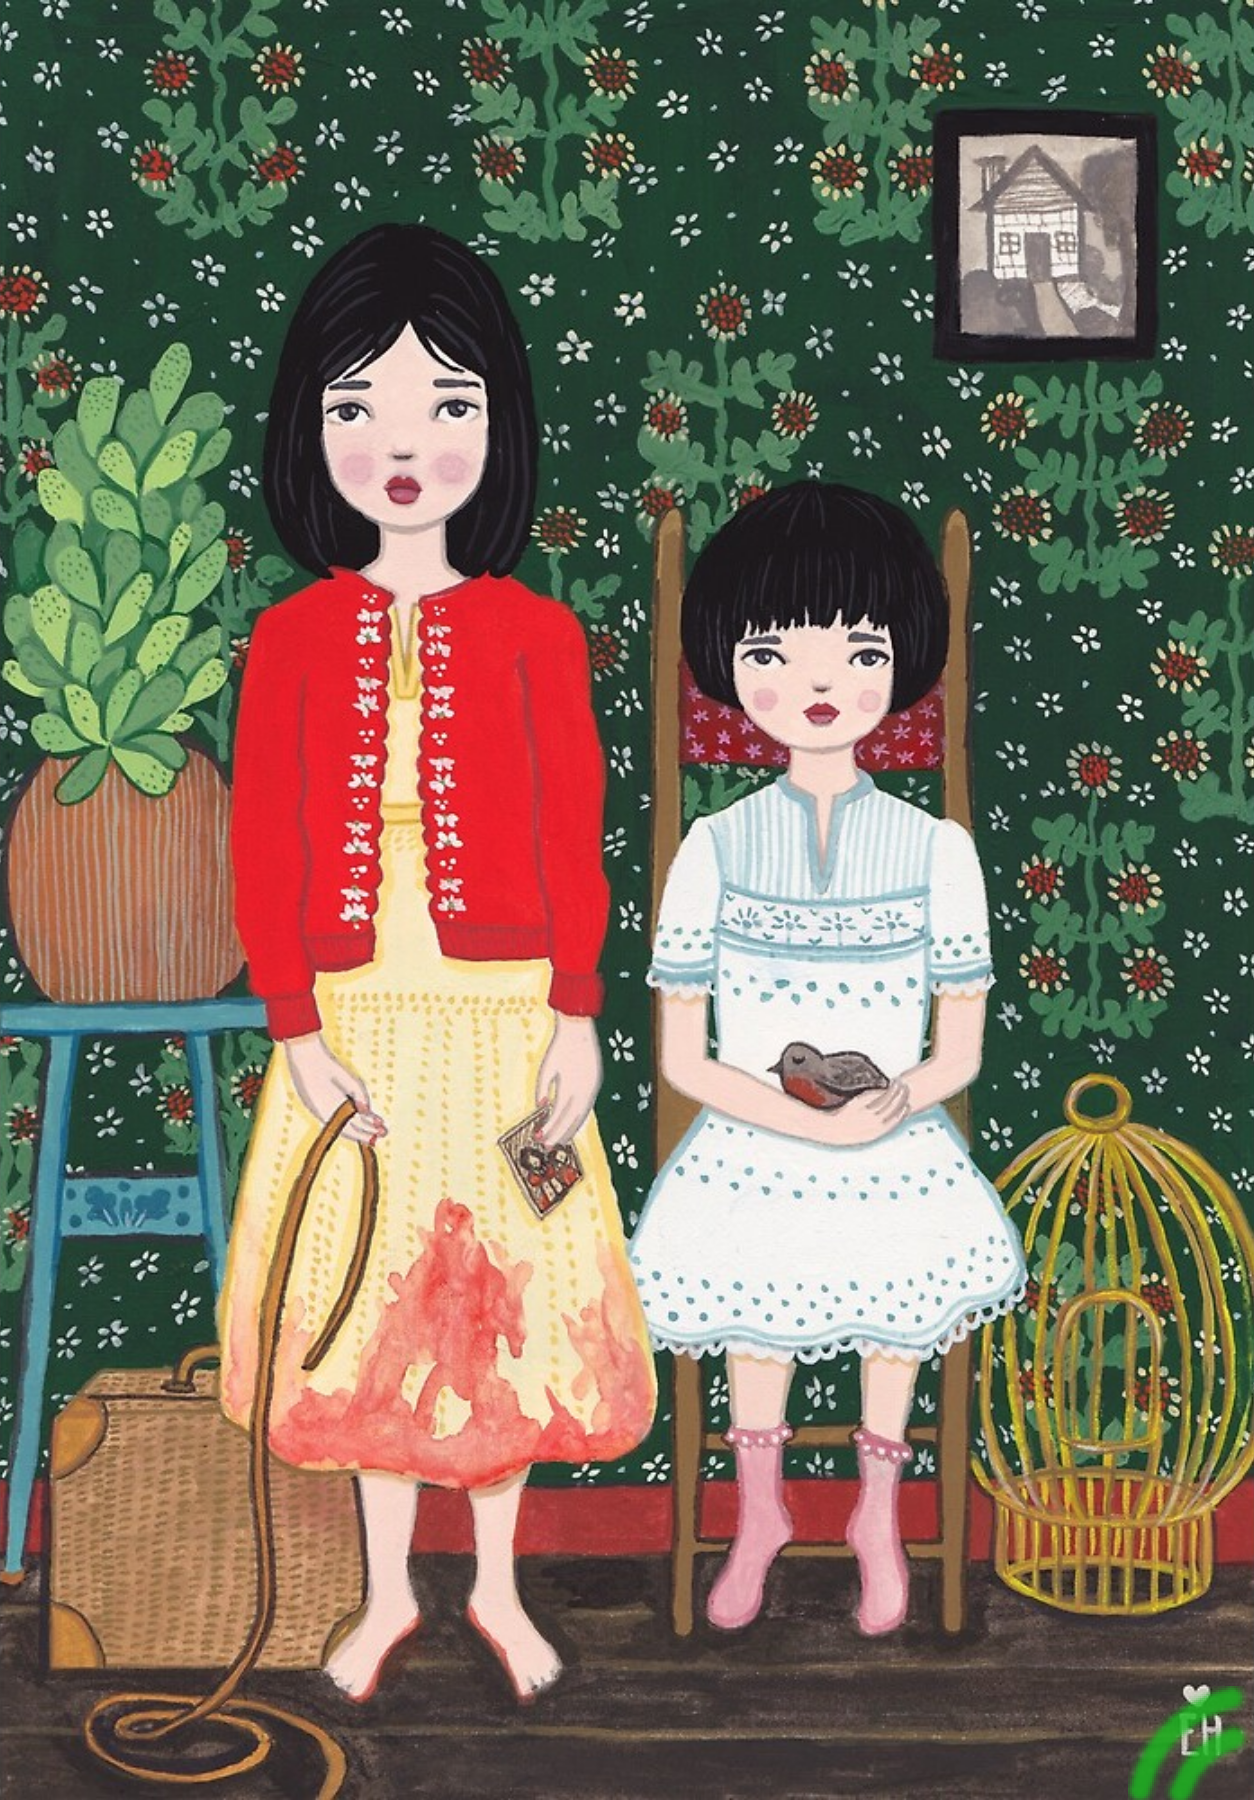 A Tale of Two Sisters poster by Emma Hampton